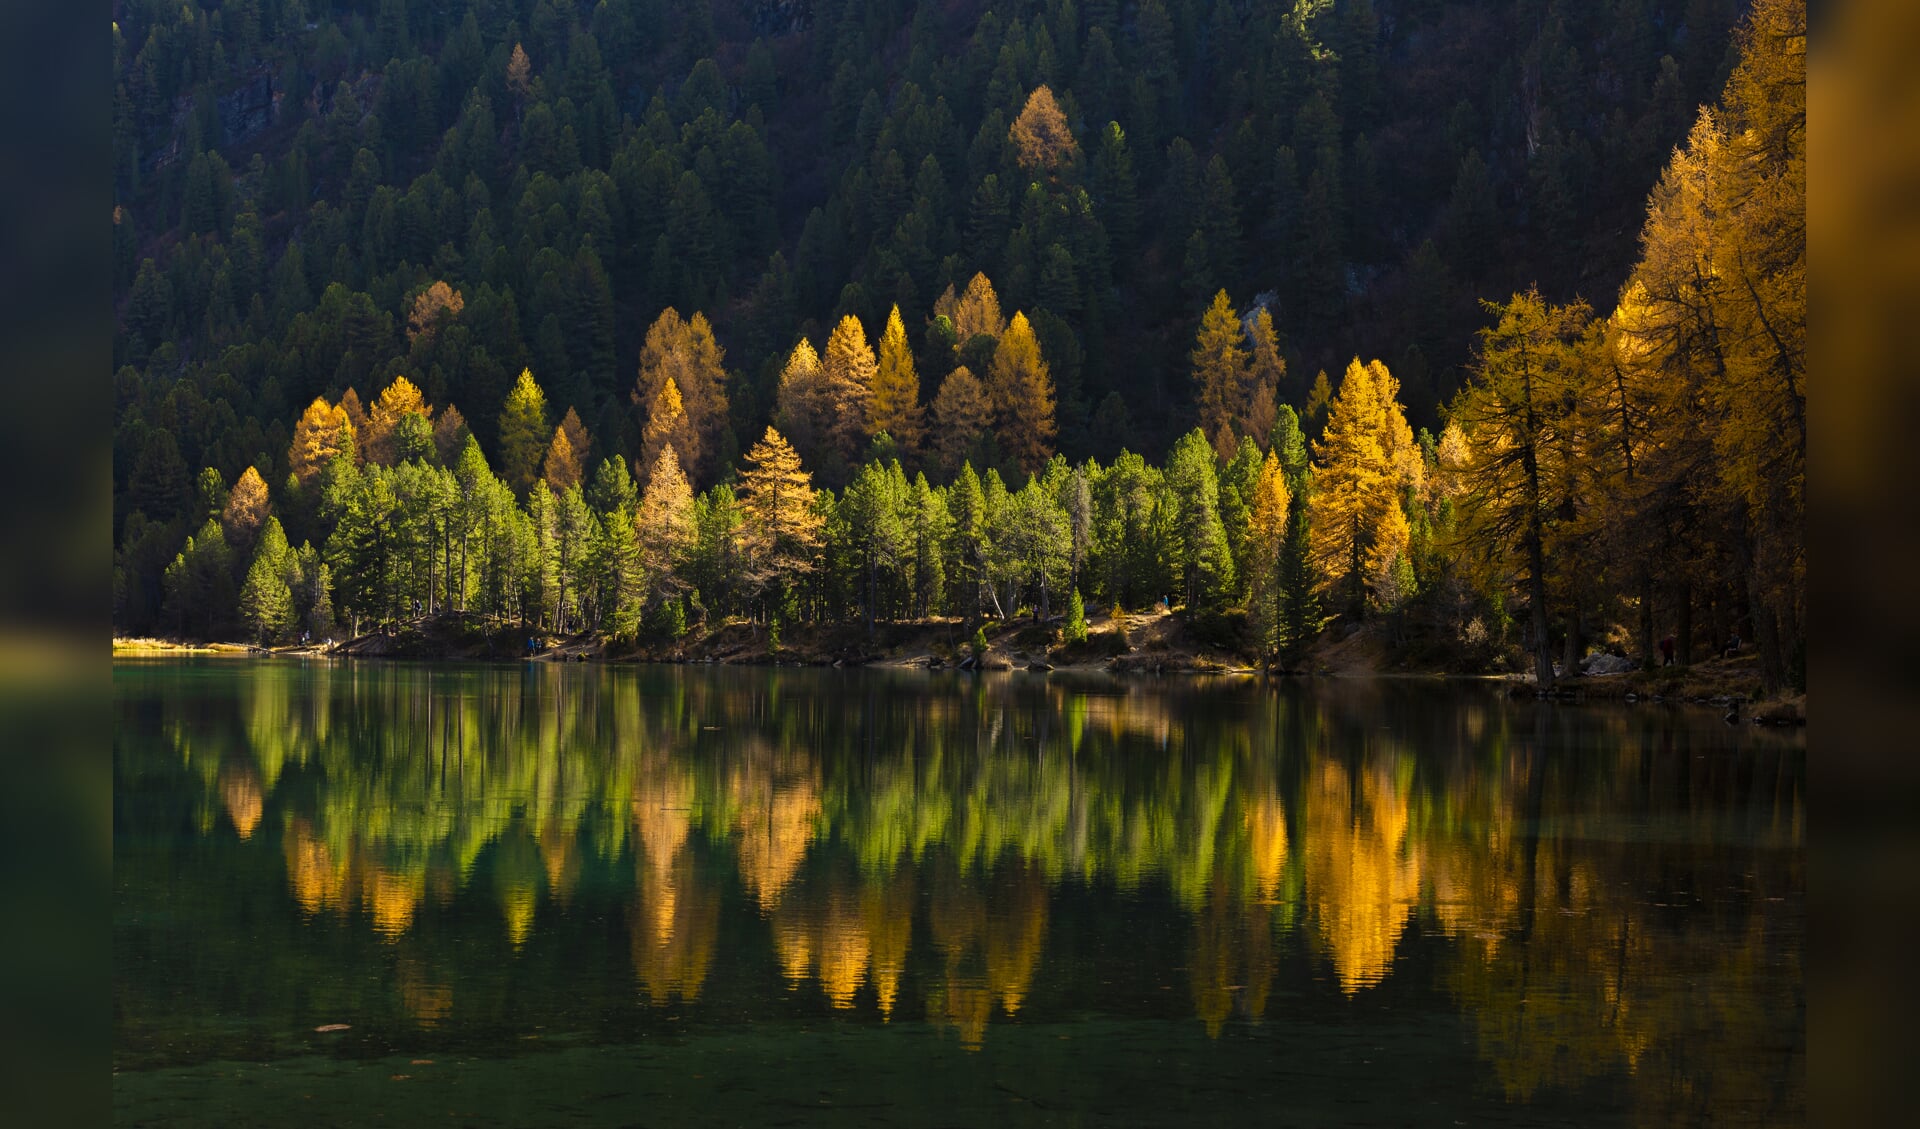 Every october I am in the Swiss Alps to capture the fall colors and at one of my favorite spots I was so lucky to capture the larch trees lit by the sun, reflecting into the water of a lake.